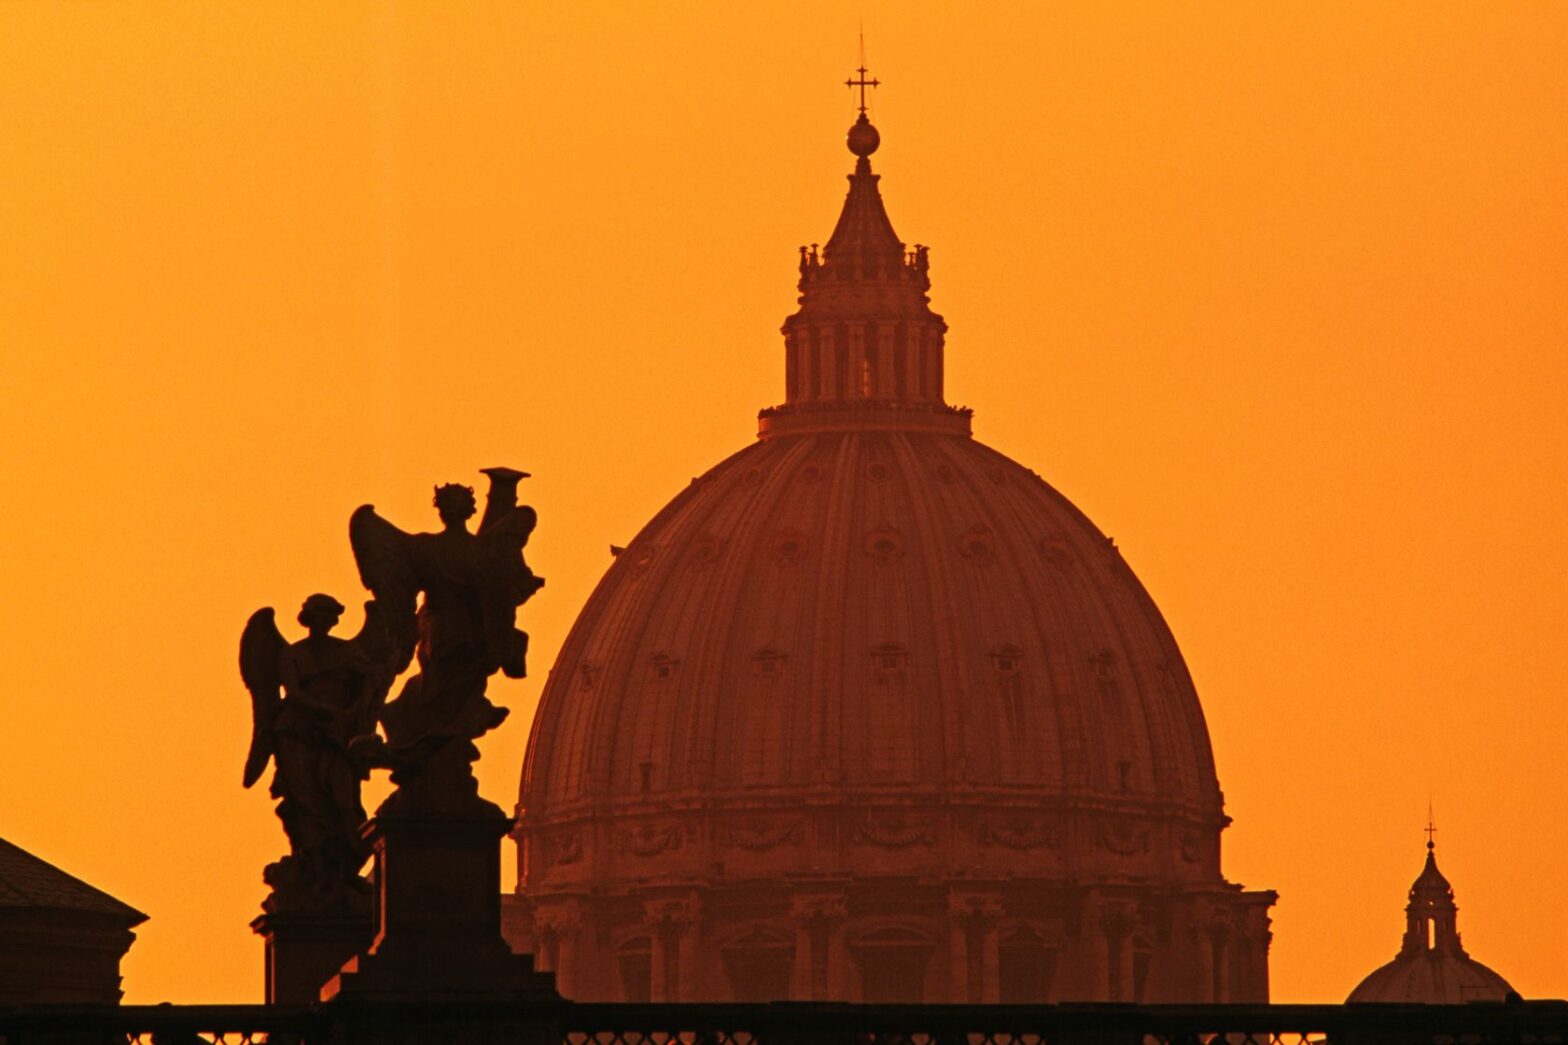 Dome of St. Peter's Basilica at sunset